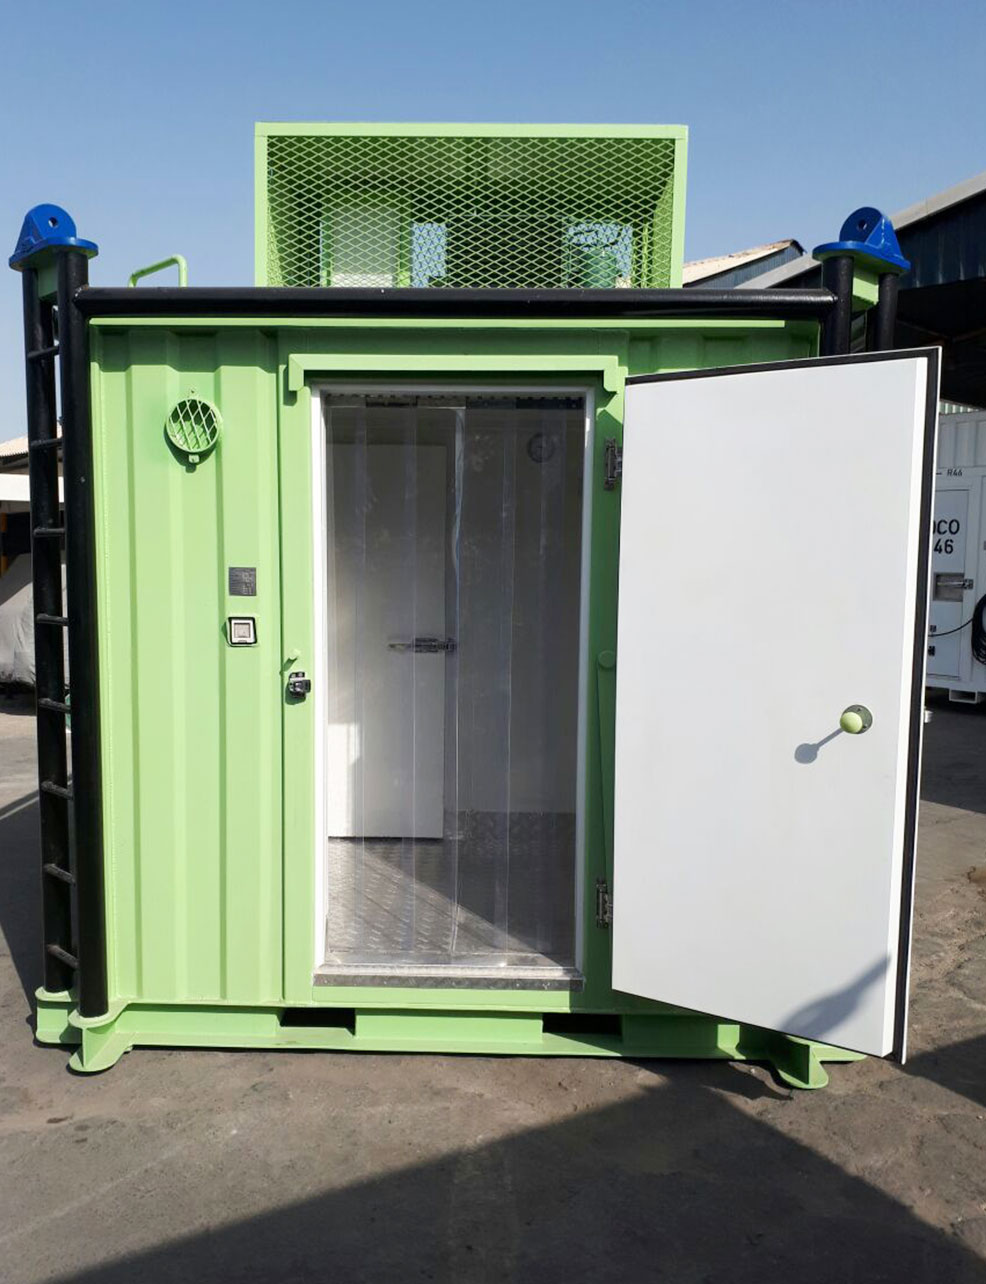 Refrigerated and specialised containers